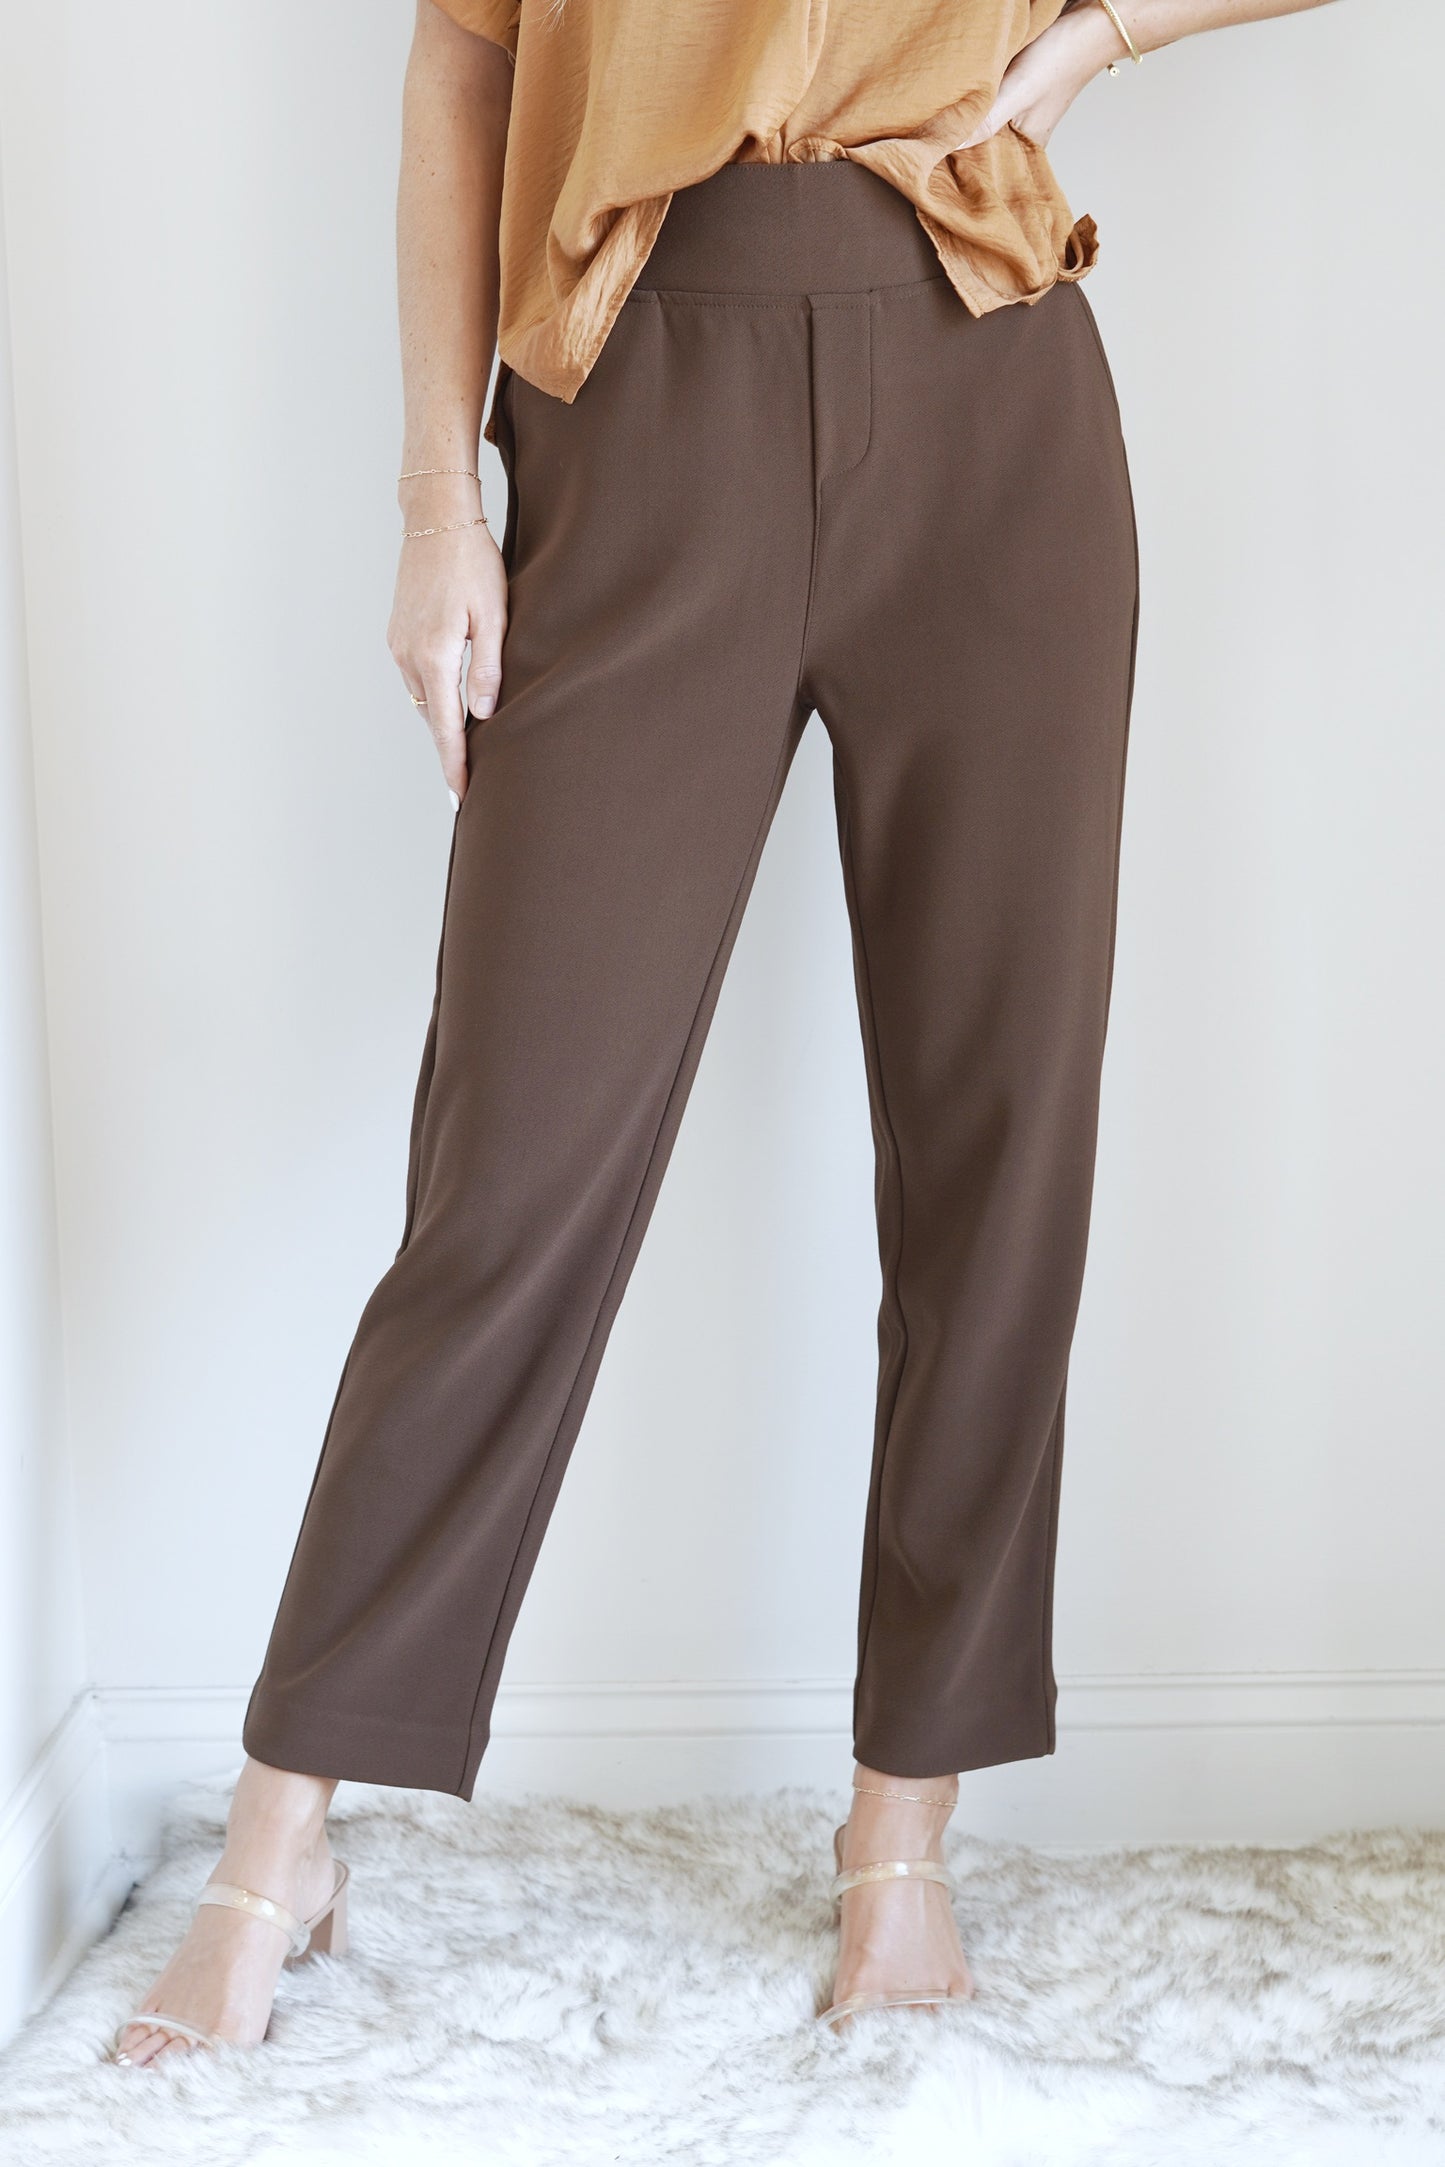 Serenity Sleek Dress Pant Thick Elastic Waistband Ankle Length Fitted Brown Side Pockets 97% Polyester, 3% Spandex